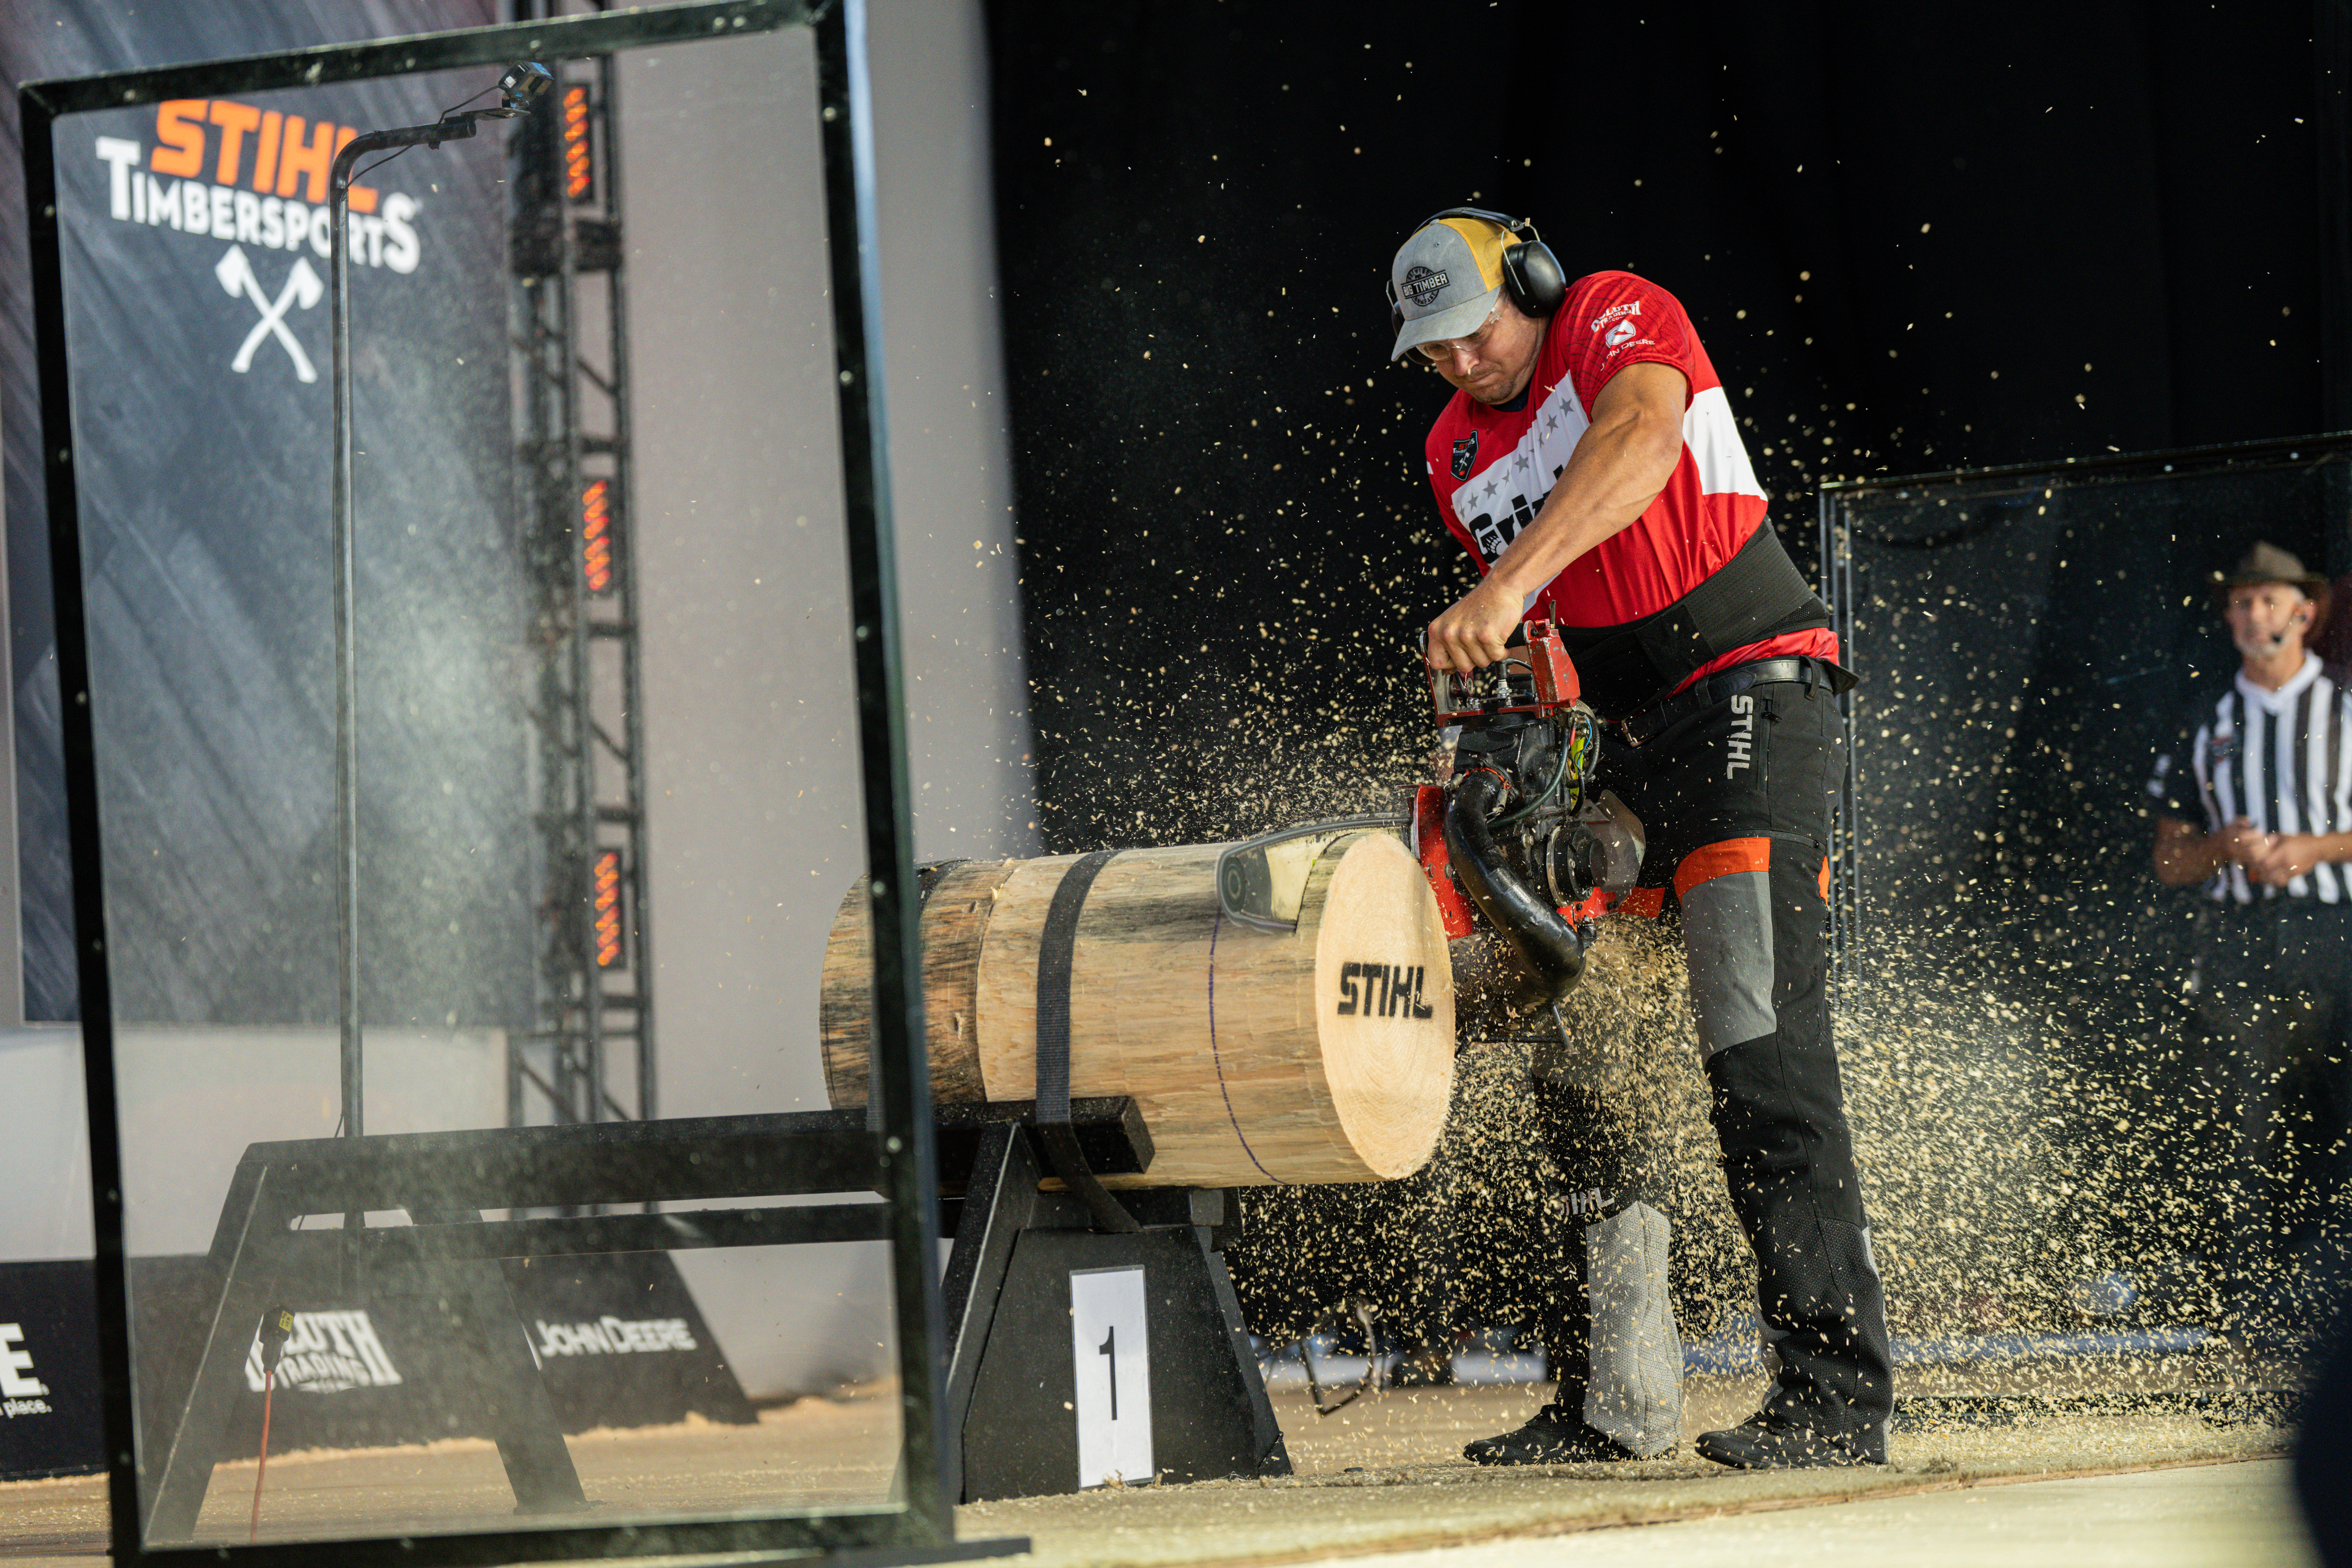 Jason Lentz secures his next US Pro Title with his Hot Saw performance.